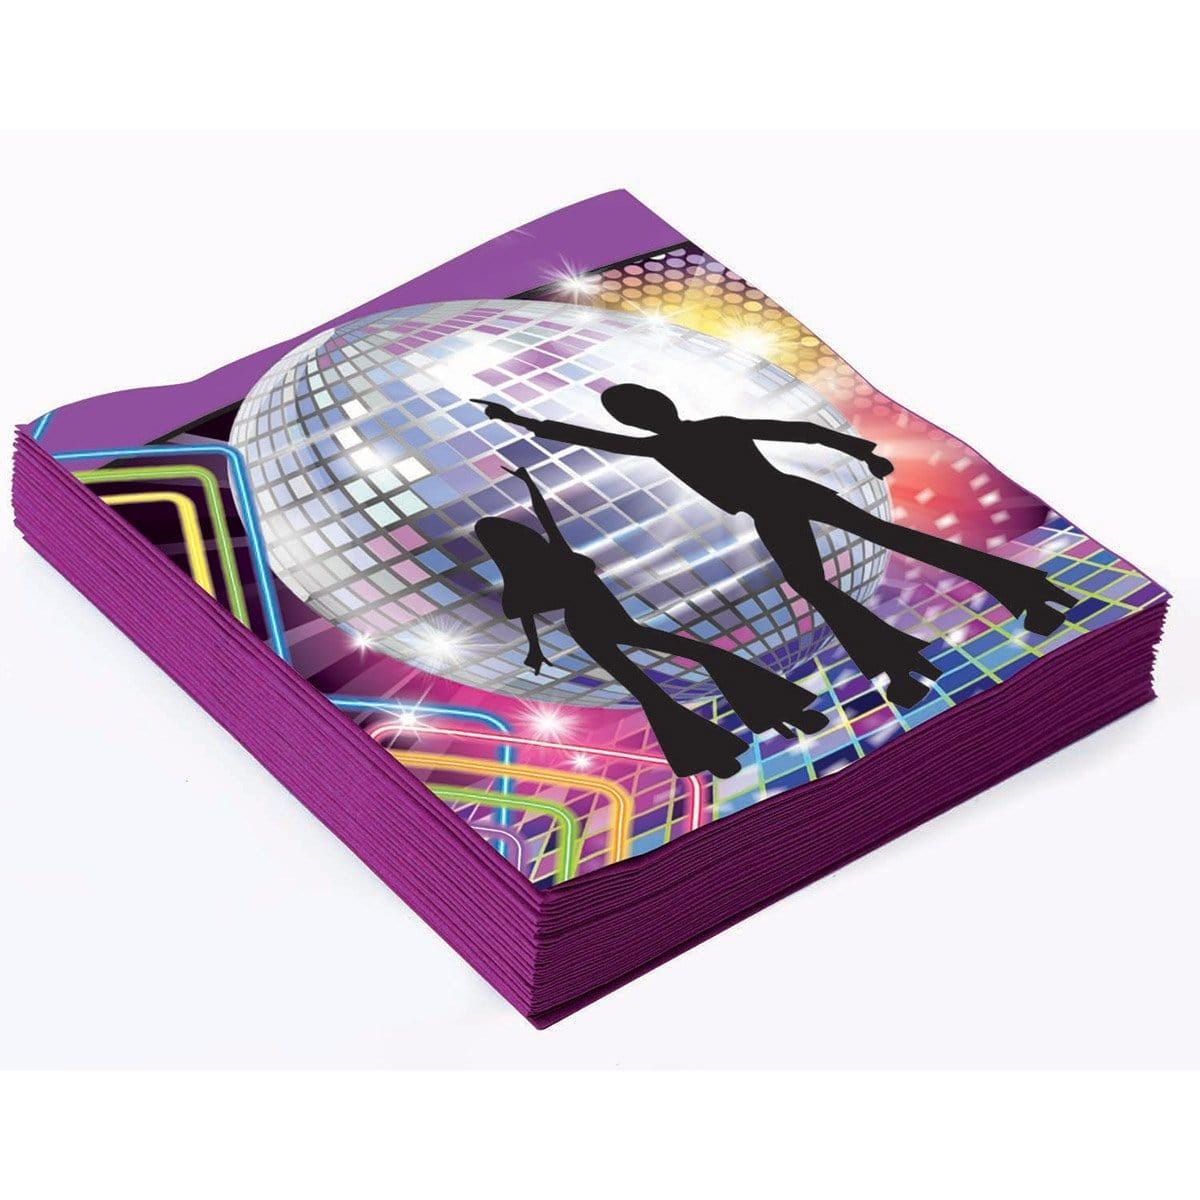 Buy Theme Party Disco Fever Lunch Napkins, 16 per Package sold at Party Expert